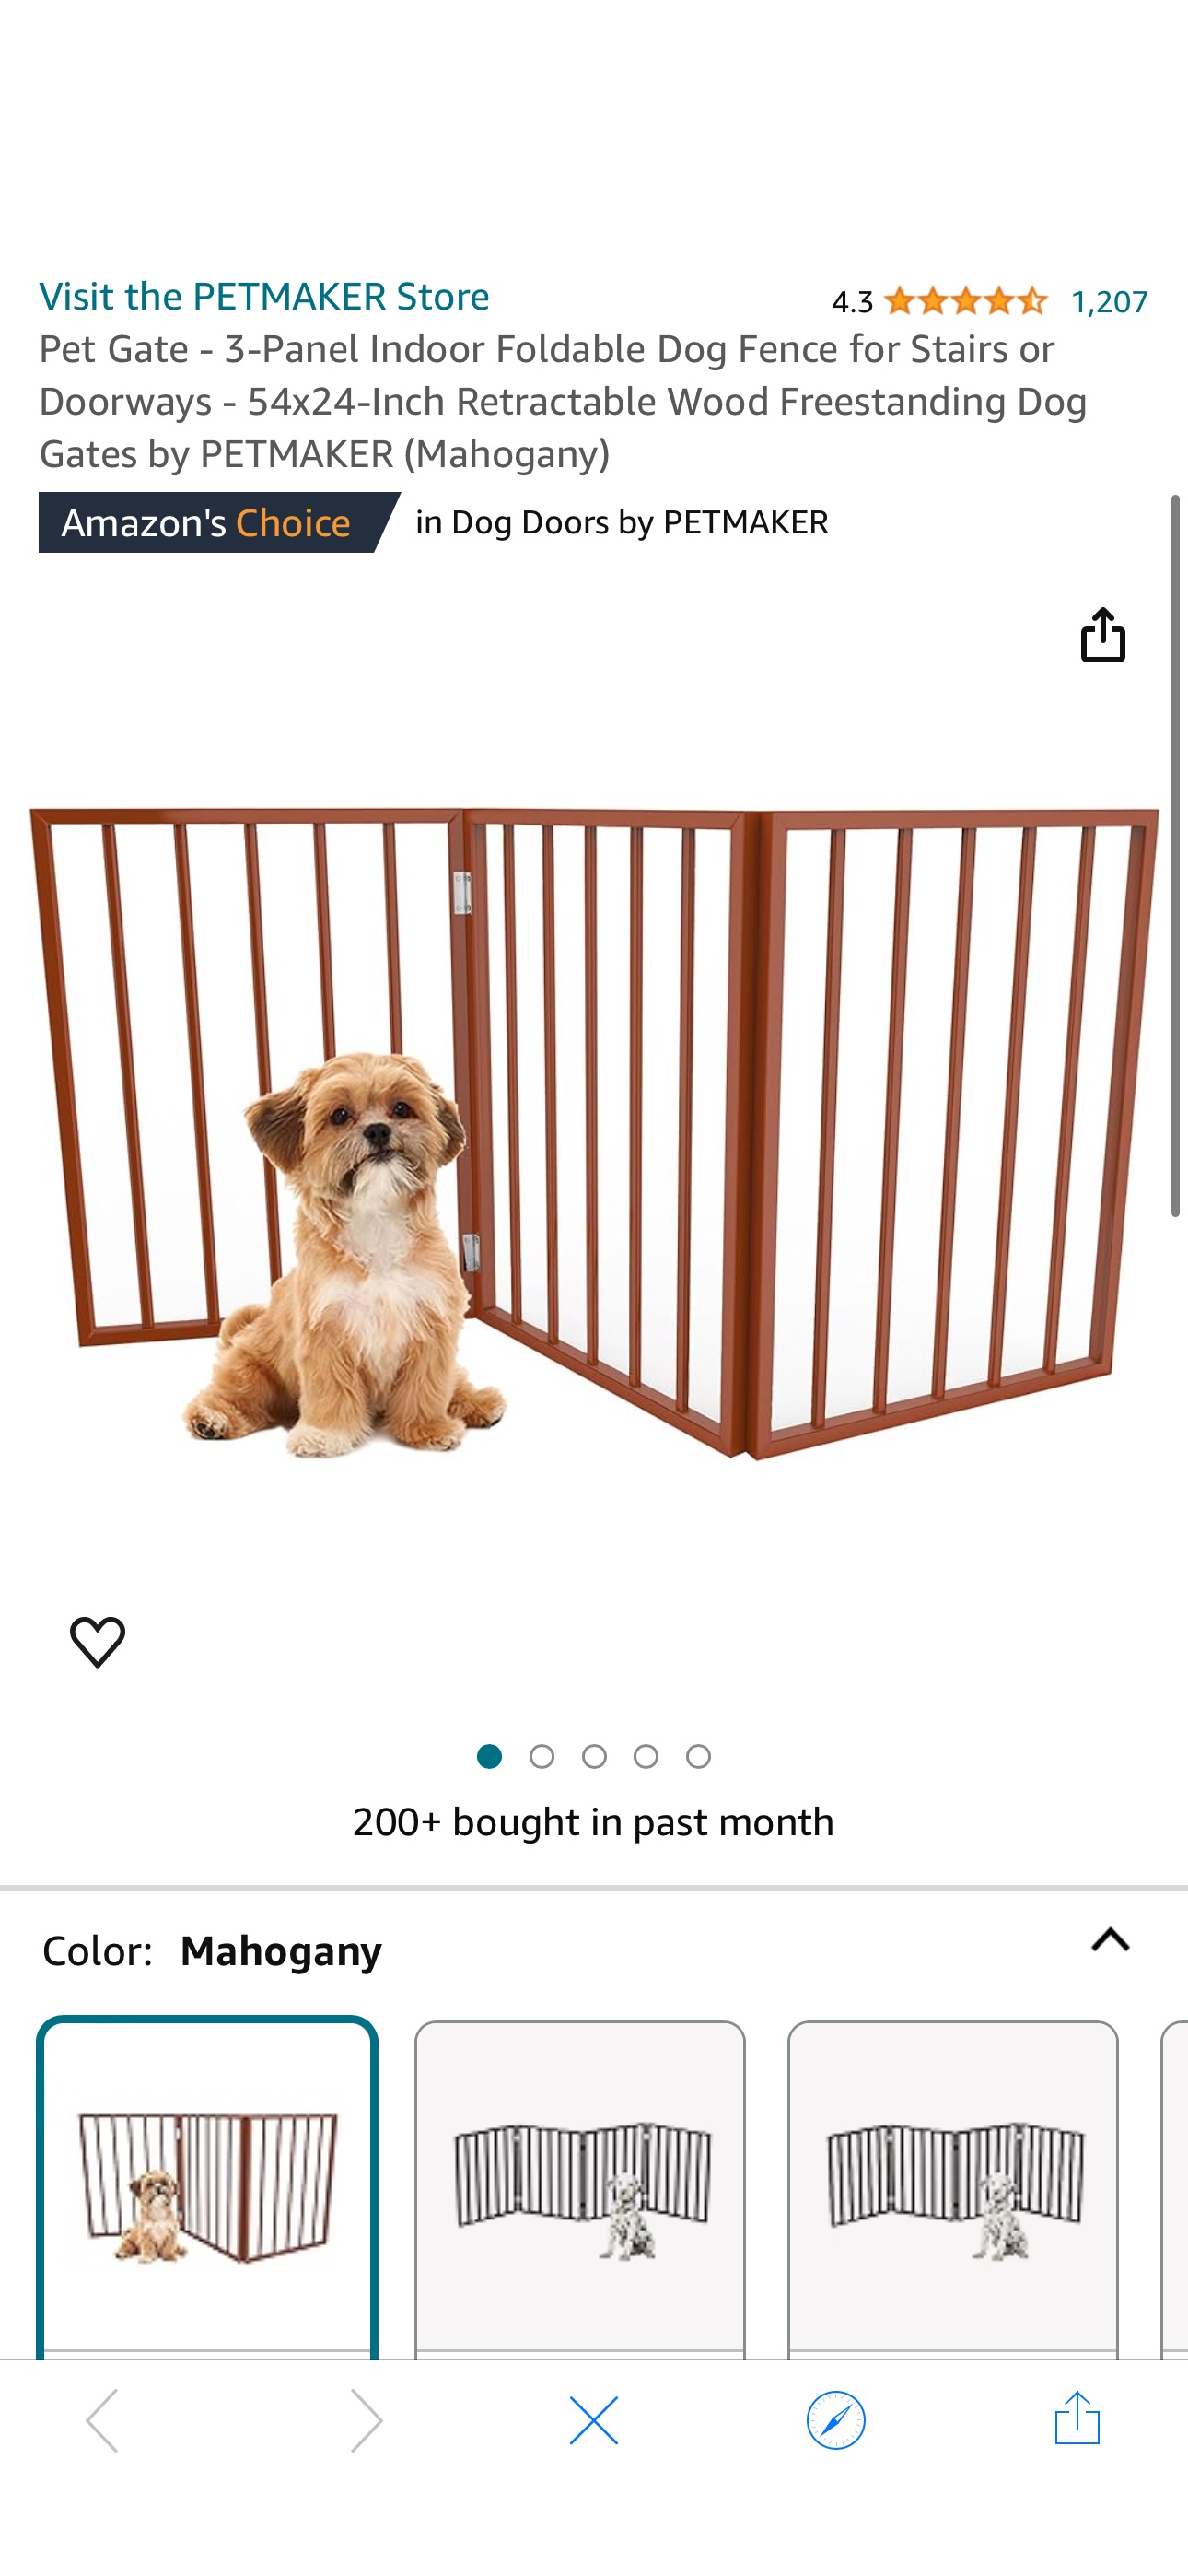 Amazon.com : Pet Gate - 3-Panel Indoor Foldable Dog Fence for Stairs or Doorways - 54x24-Inch Retractable Wood Freestanding Dog Gates by PETMAKER (Mahogany) : Pet Supplies